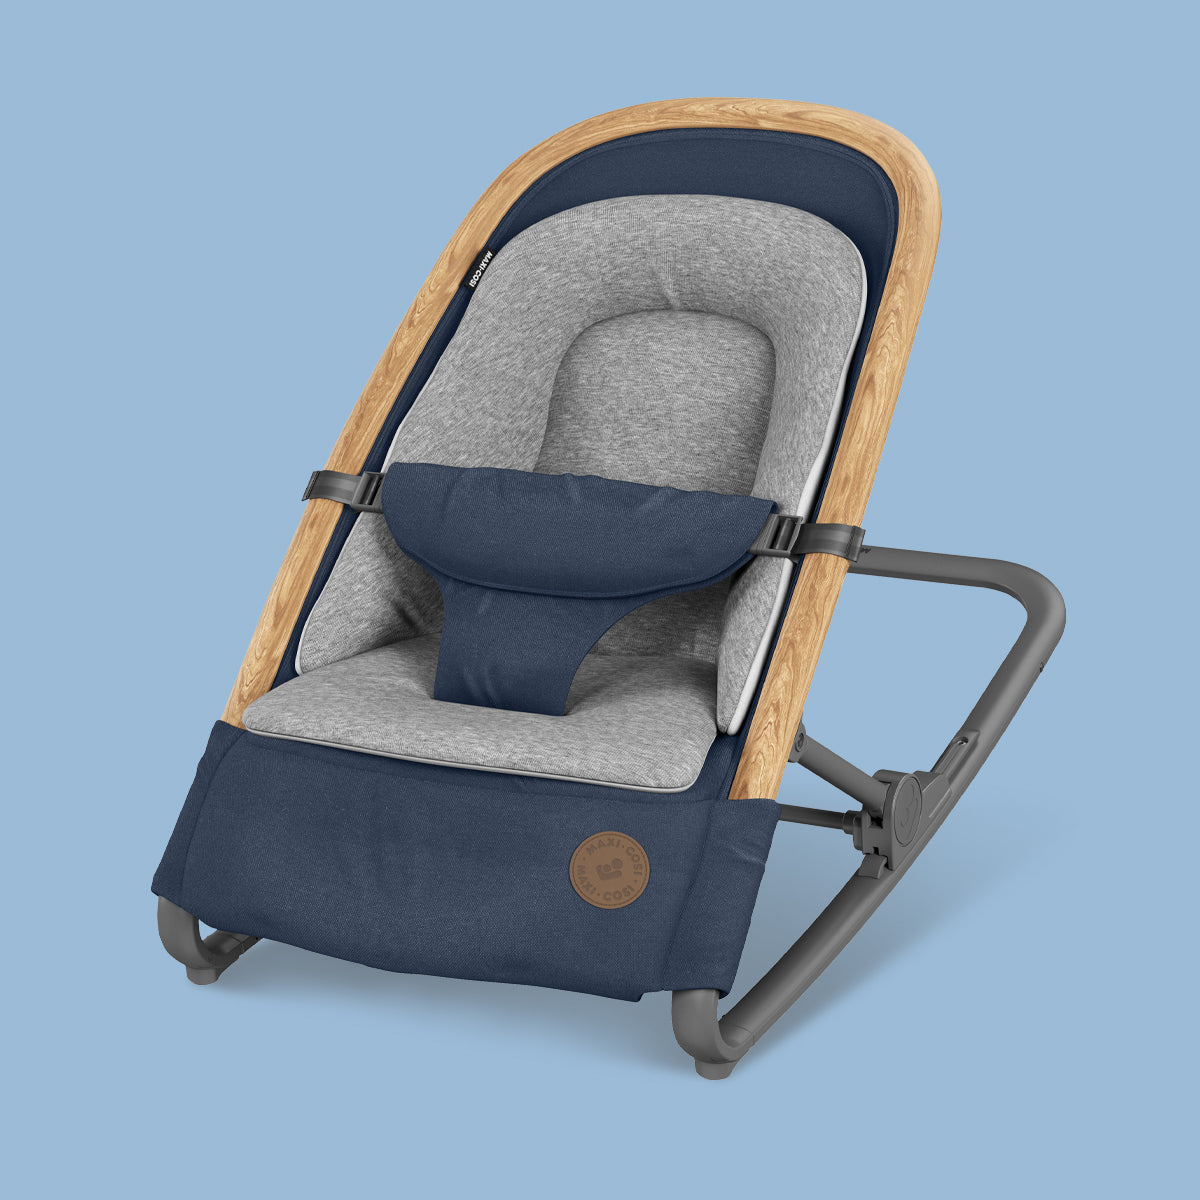 A relaxing blue and grey Maxi-Cosi UAE Kori Rocker on a blue background.